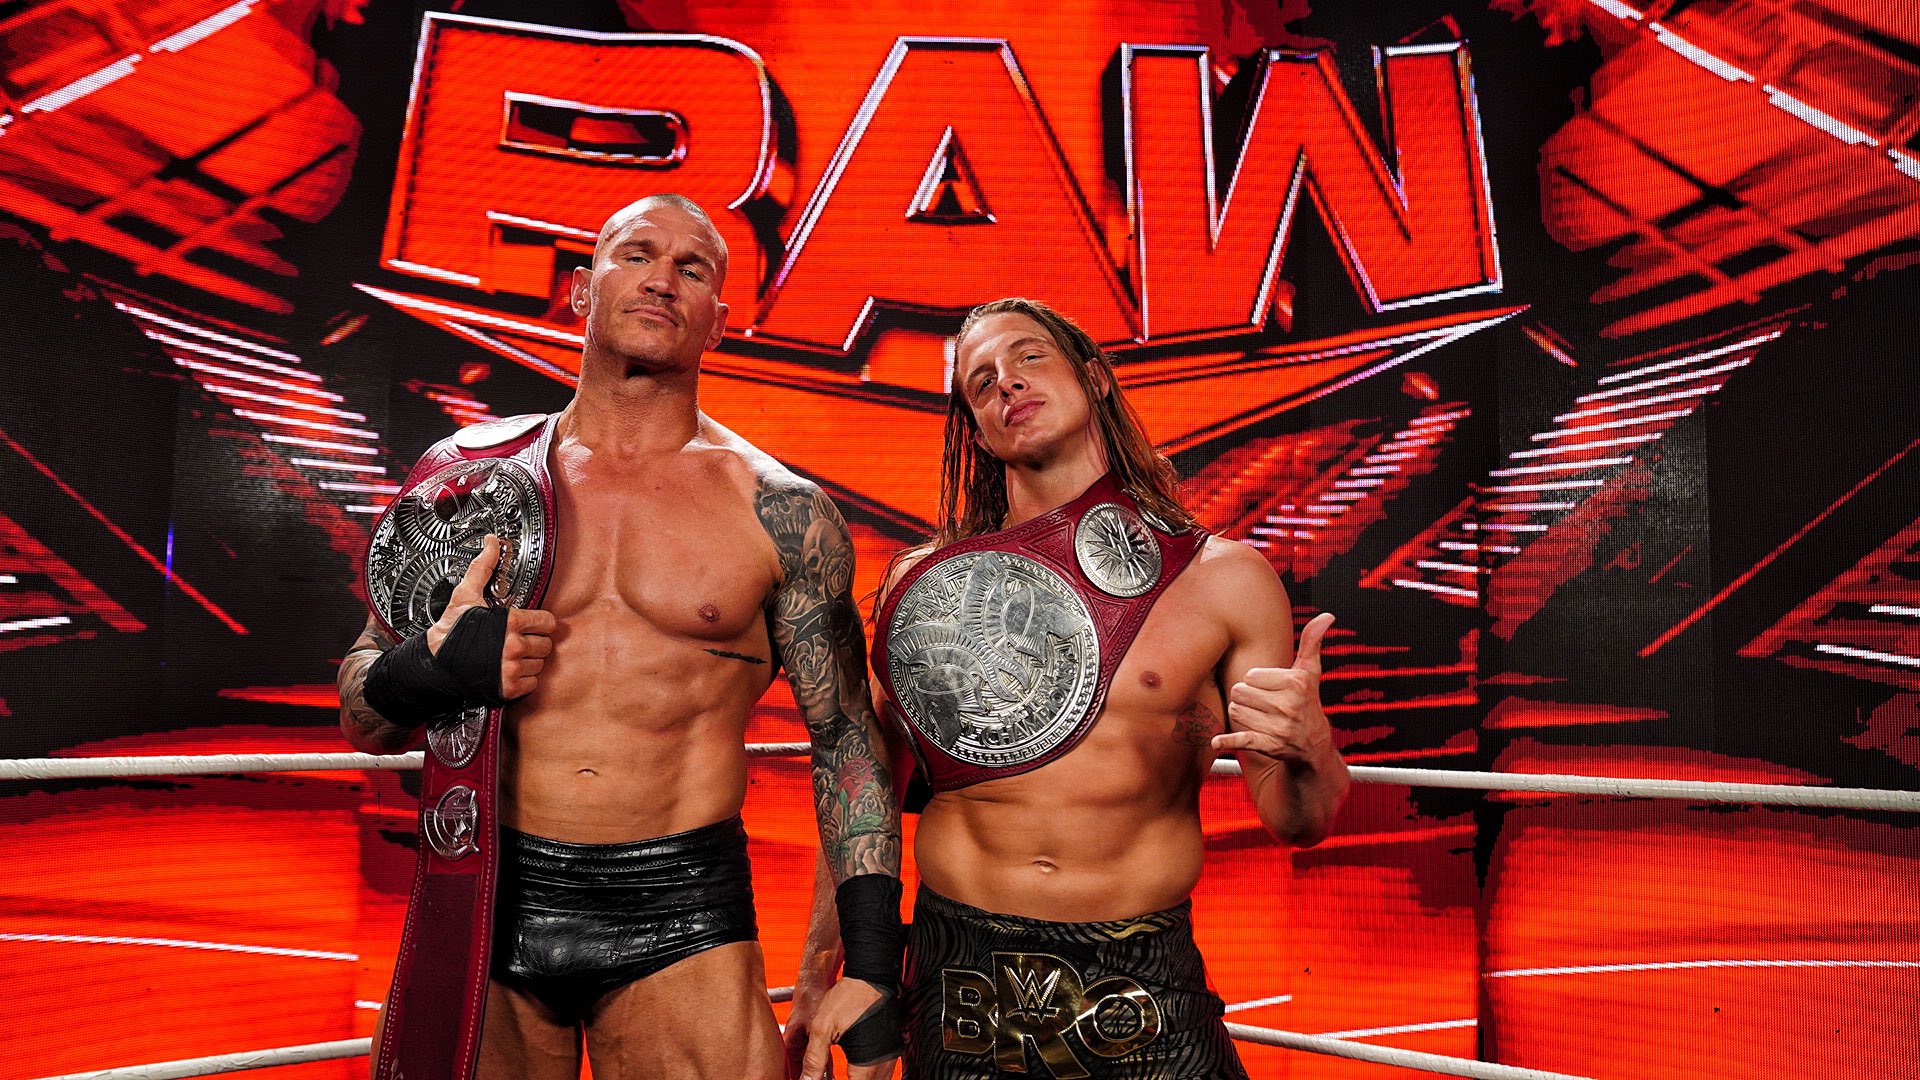 An image that features Randy Orton and Matt Riddle after winning the Raw Tag Team Championships.